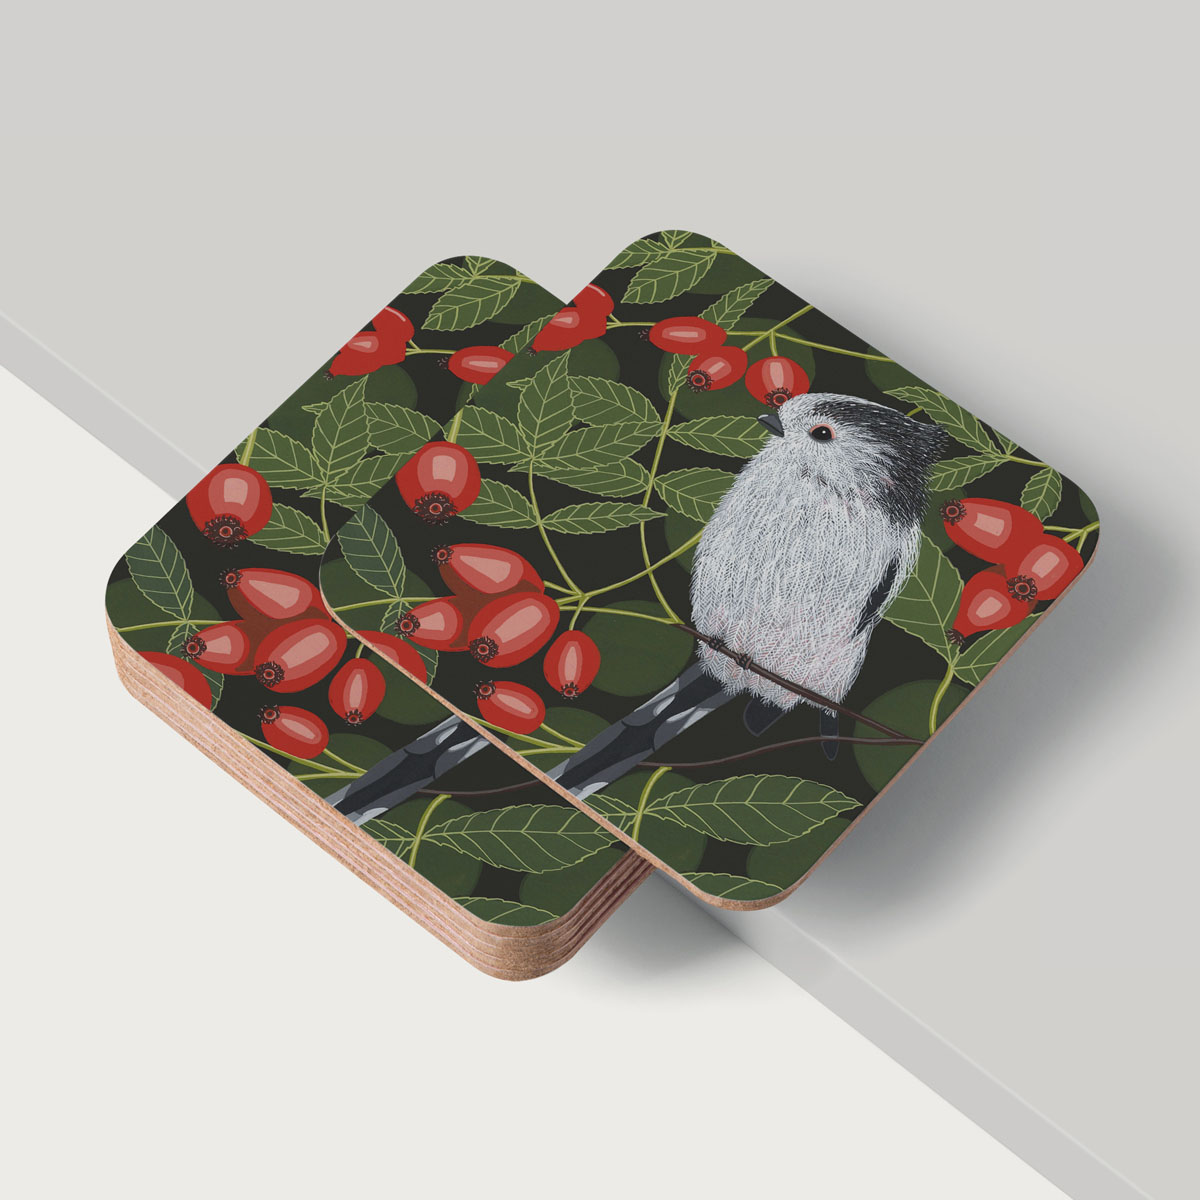 Long Tailed Tit Bird Placemat And Coaster Tableware